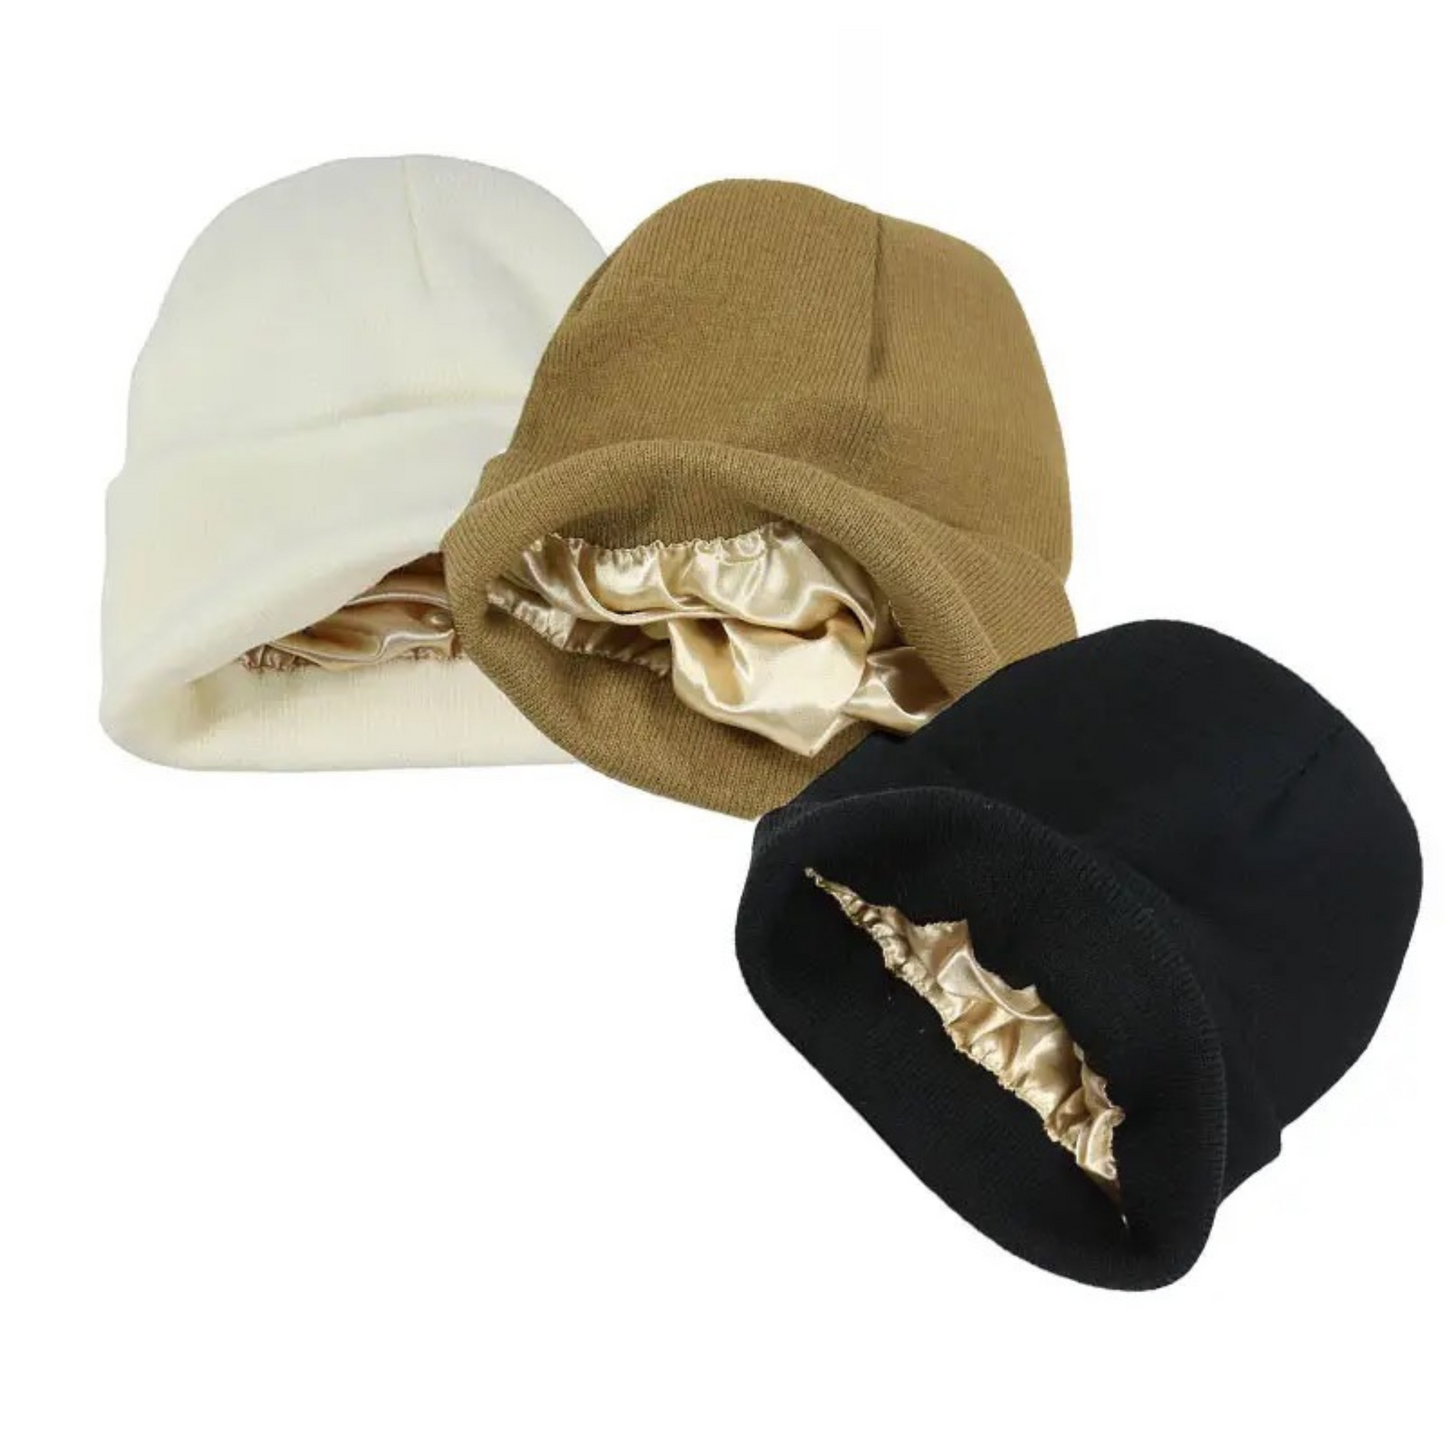 Satin-Lined Knit Beanie Hat